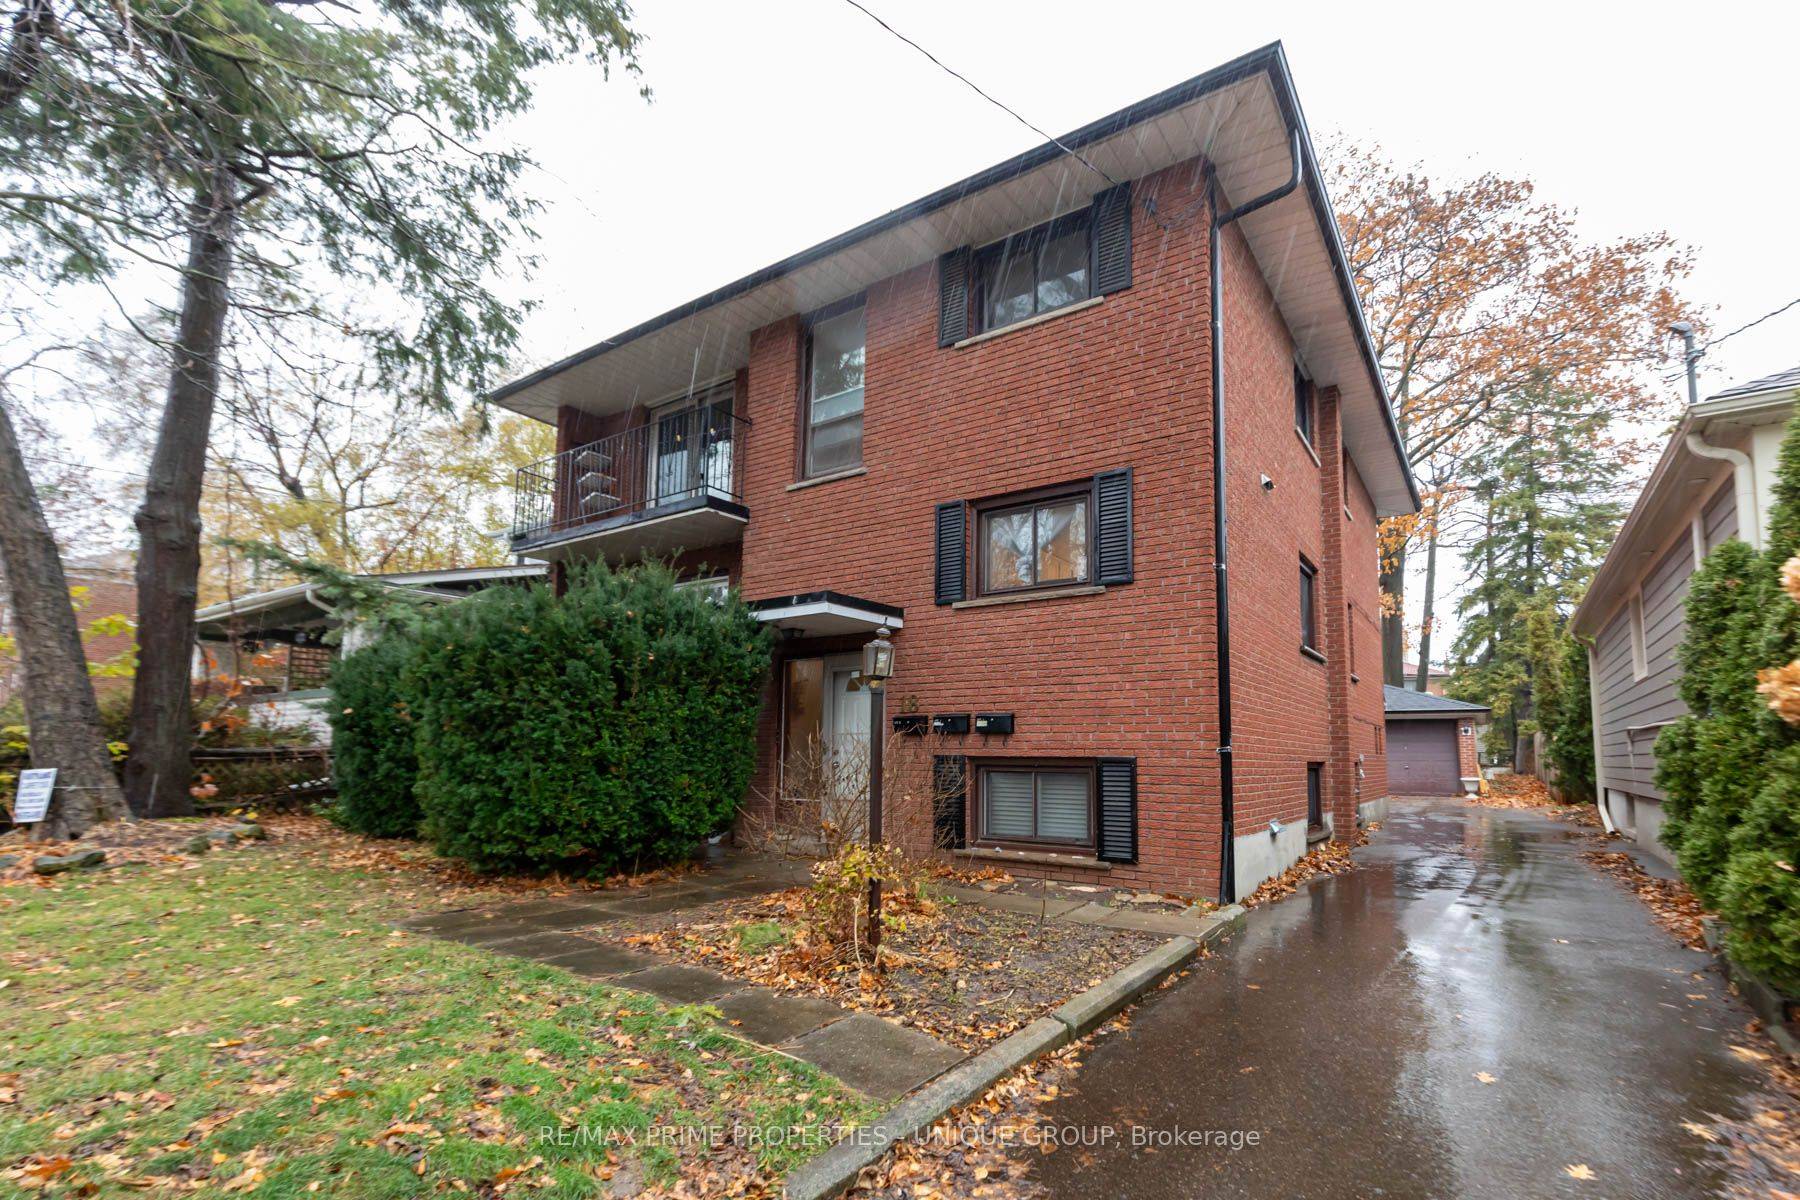 3 Suite Long Branch Investment Property Duplex with additional Basement Apartment Huge Suites Approx 1, 200 Square Feet in Main and Upper Apartments Detached Brick Building with Front Balconies Private ...